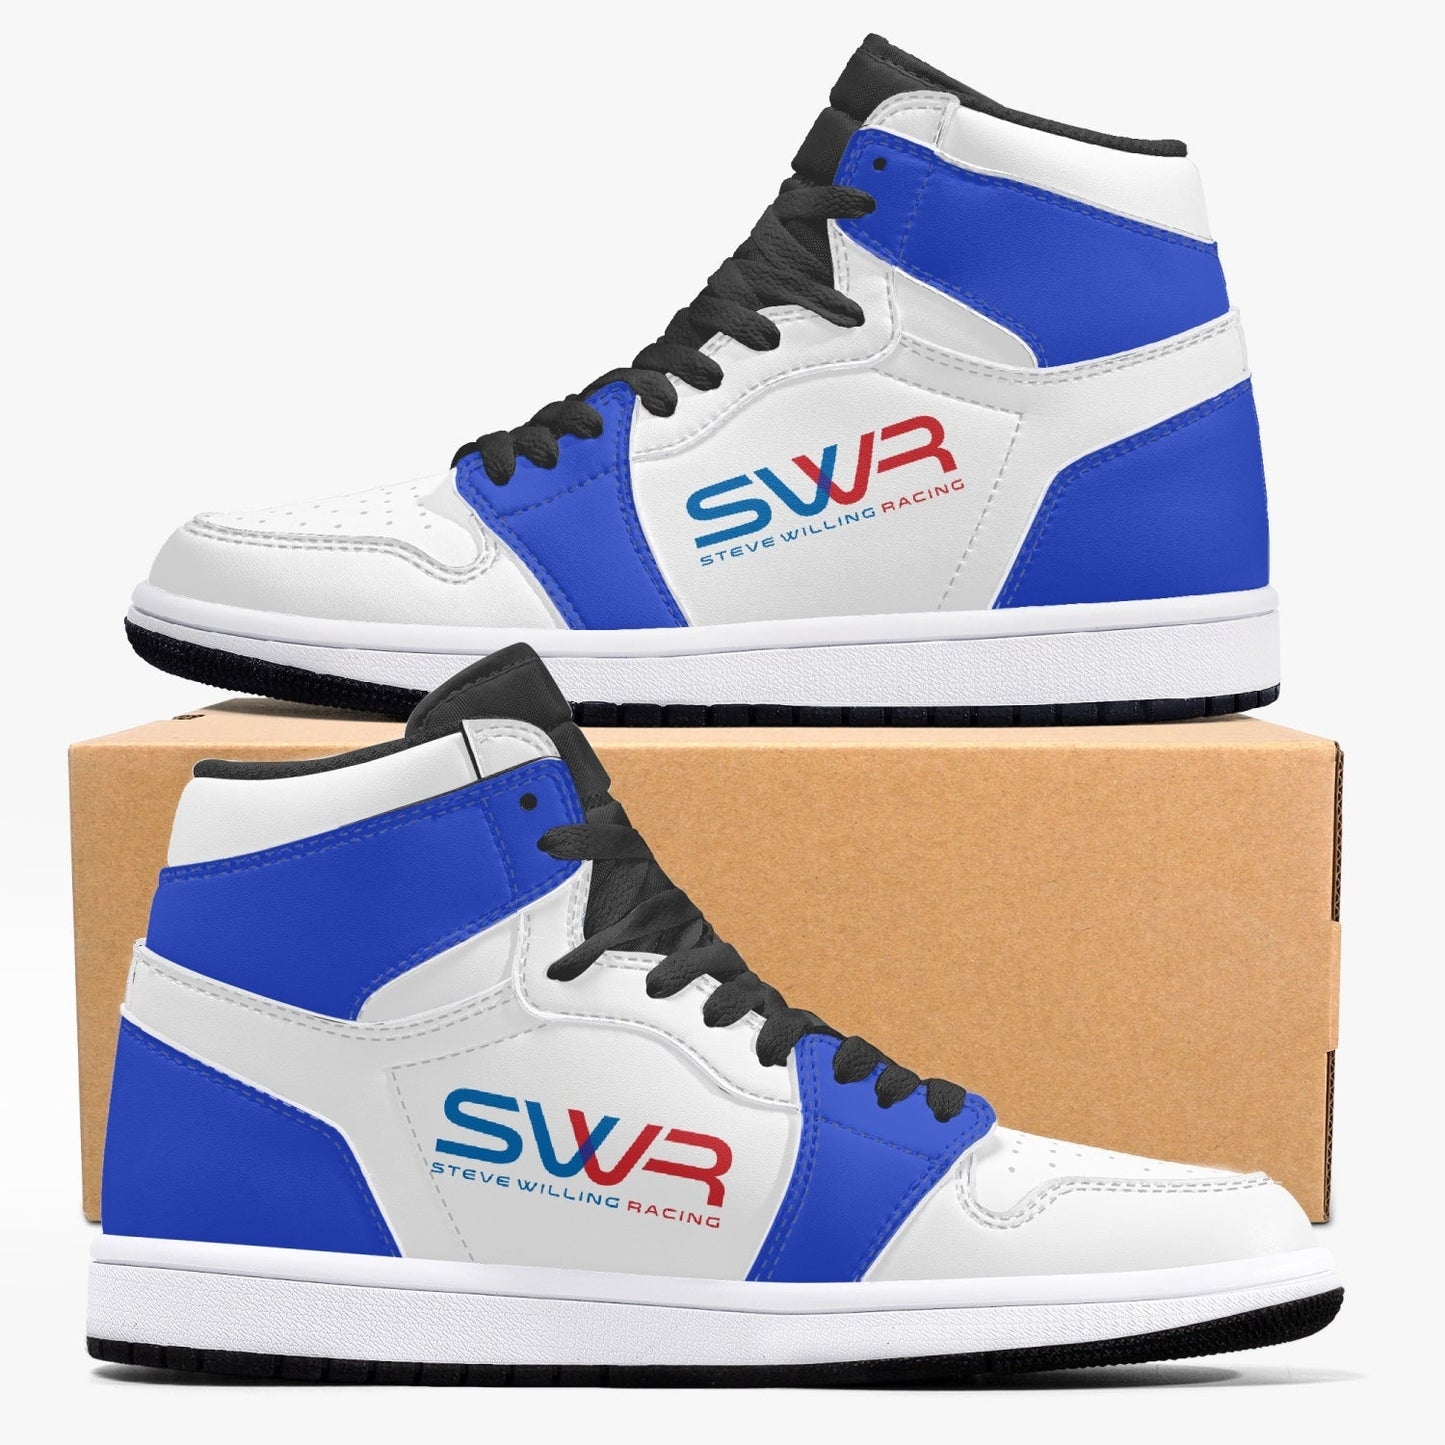 STEVE WILLING F2 MARCH version 3 High-Top Leather Sneakers - white/blue/carbon